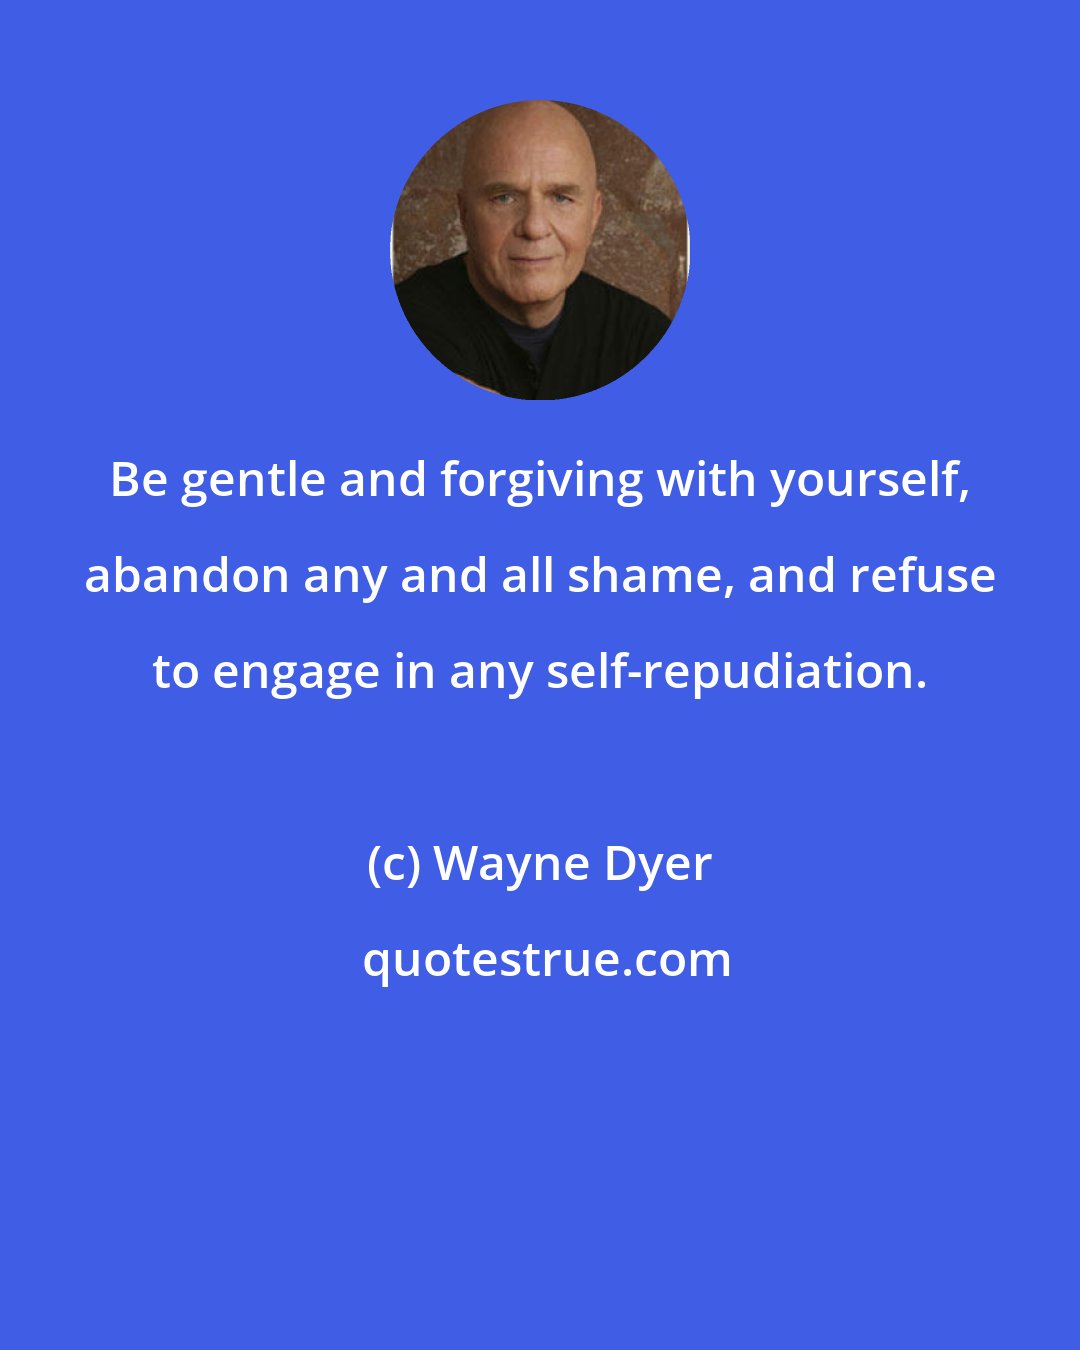 Wayne Dyer: Be gentle and forgiving with yourself, abandon any and all shame, and refuse to engage in any self-repudiation.